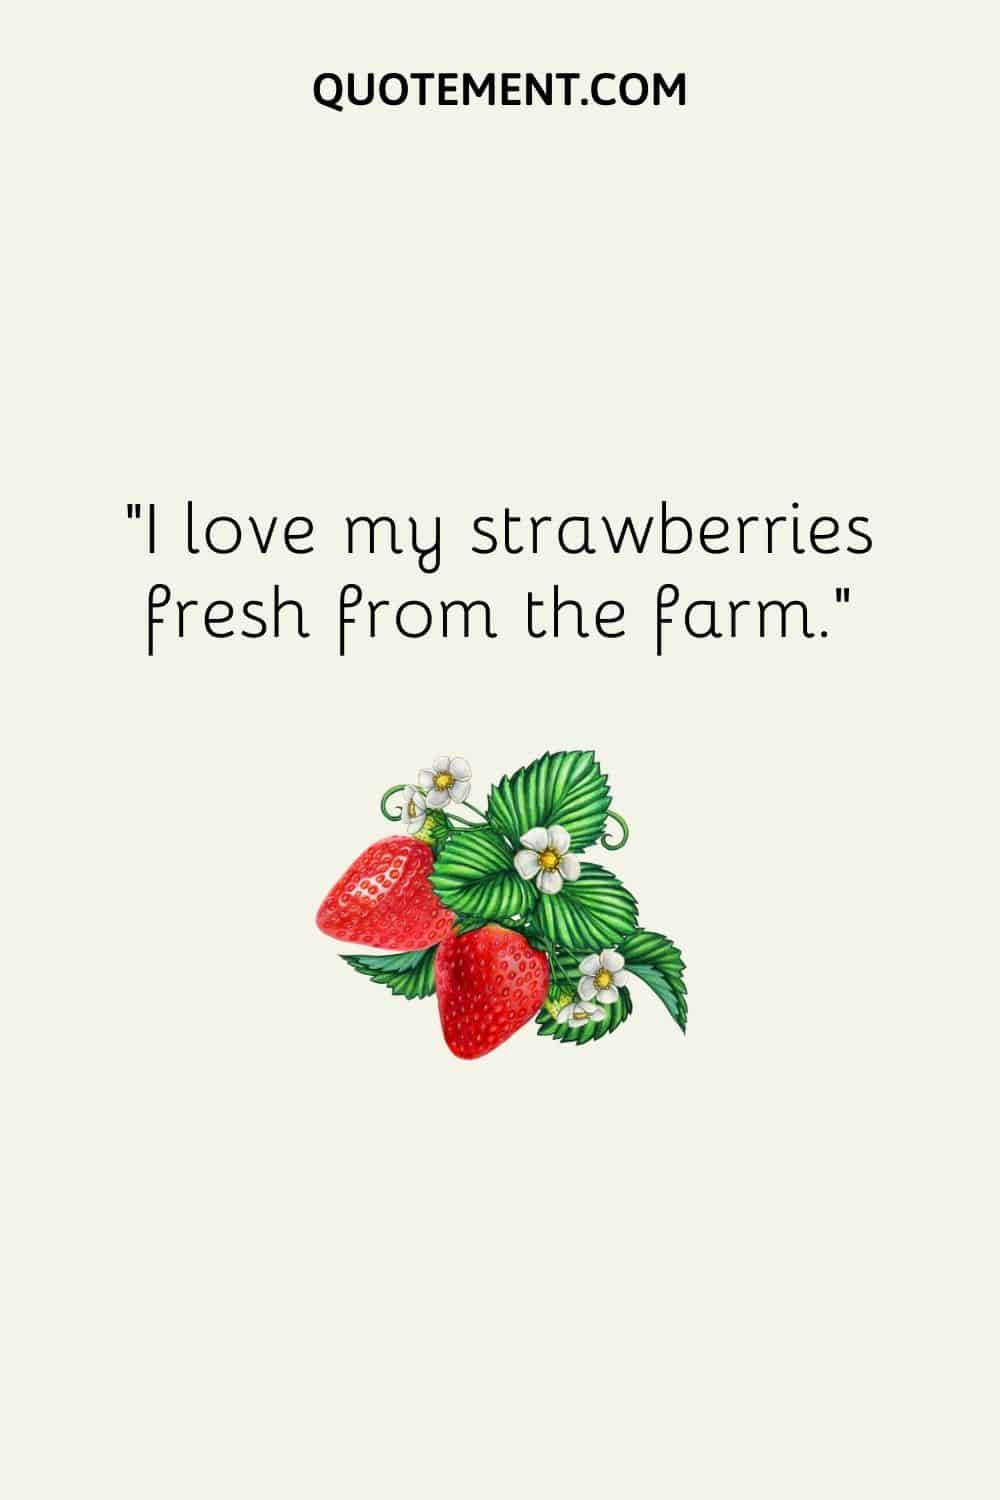 I love my strawberries fresh from the farm